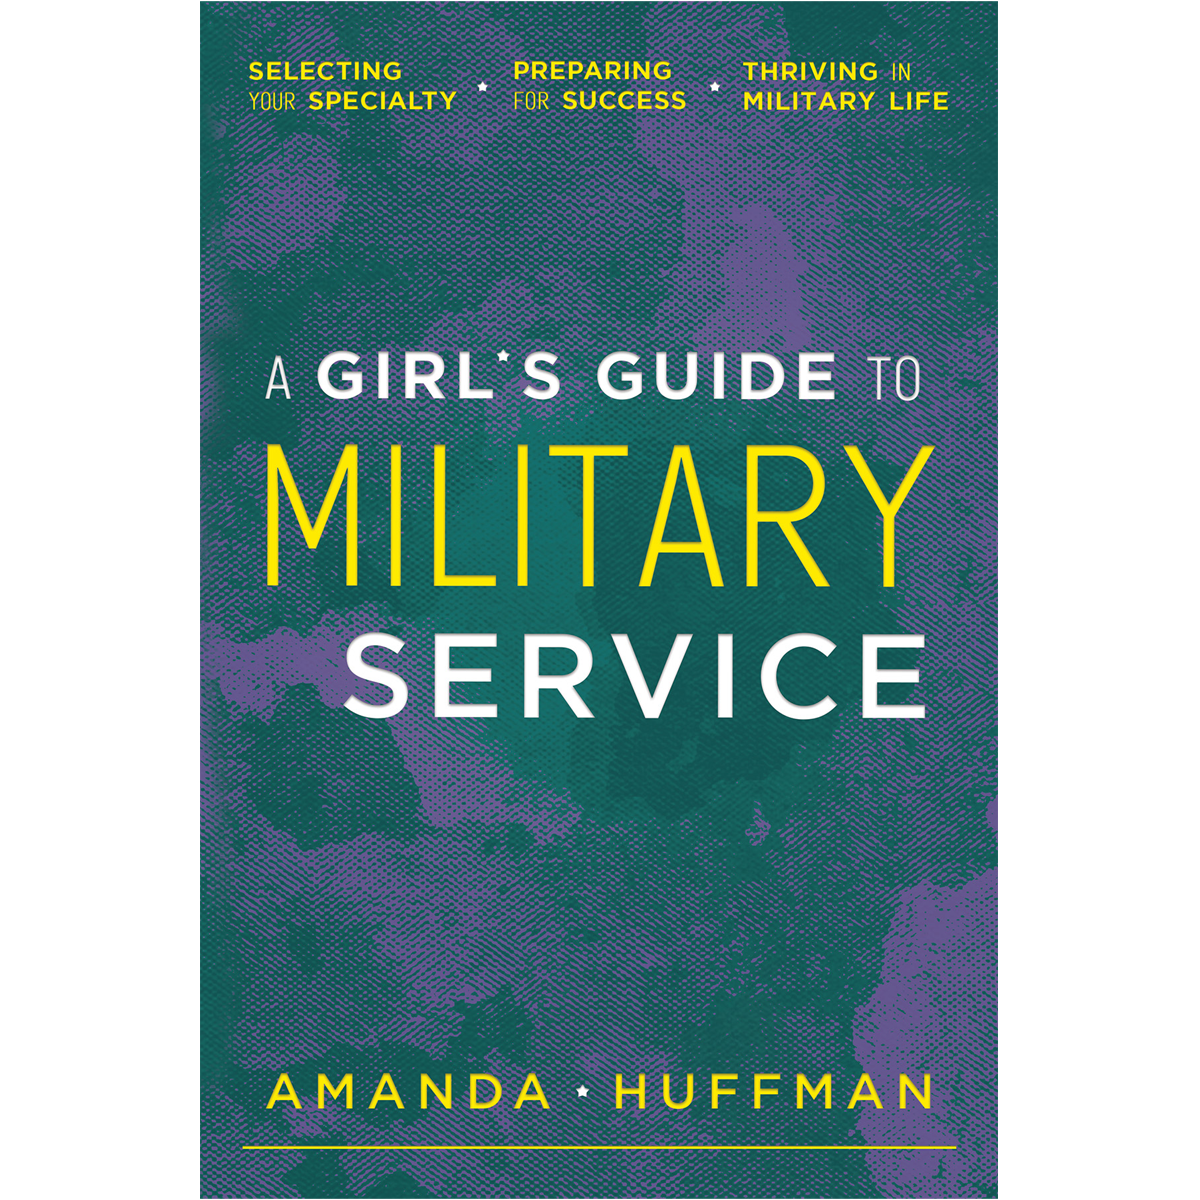 A Girl's Guide to Military Service by Amanda Huffman, published by Elva Resa Publishing